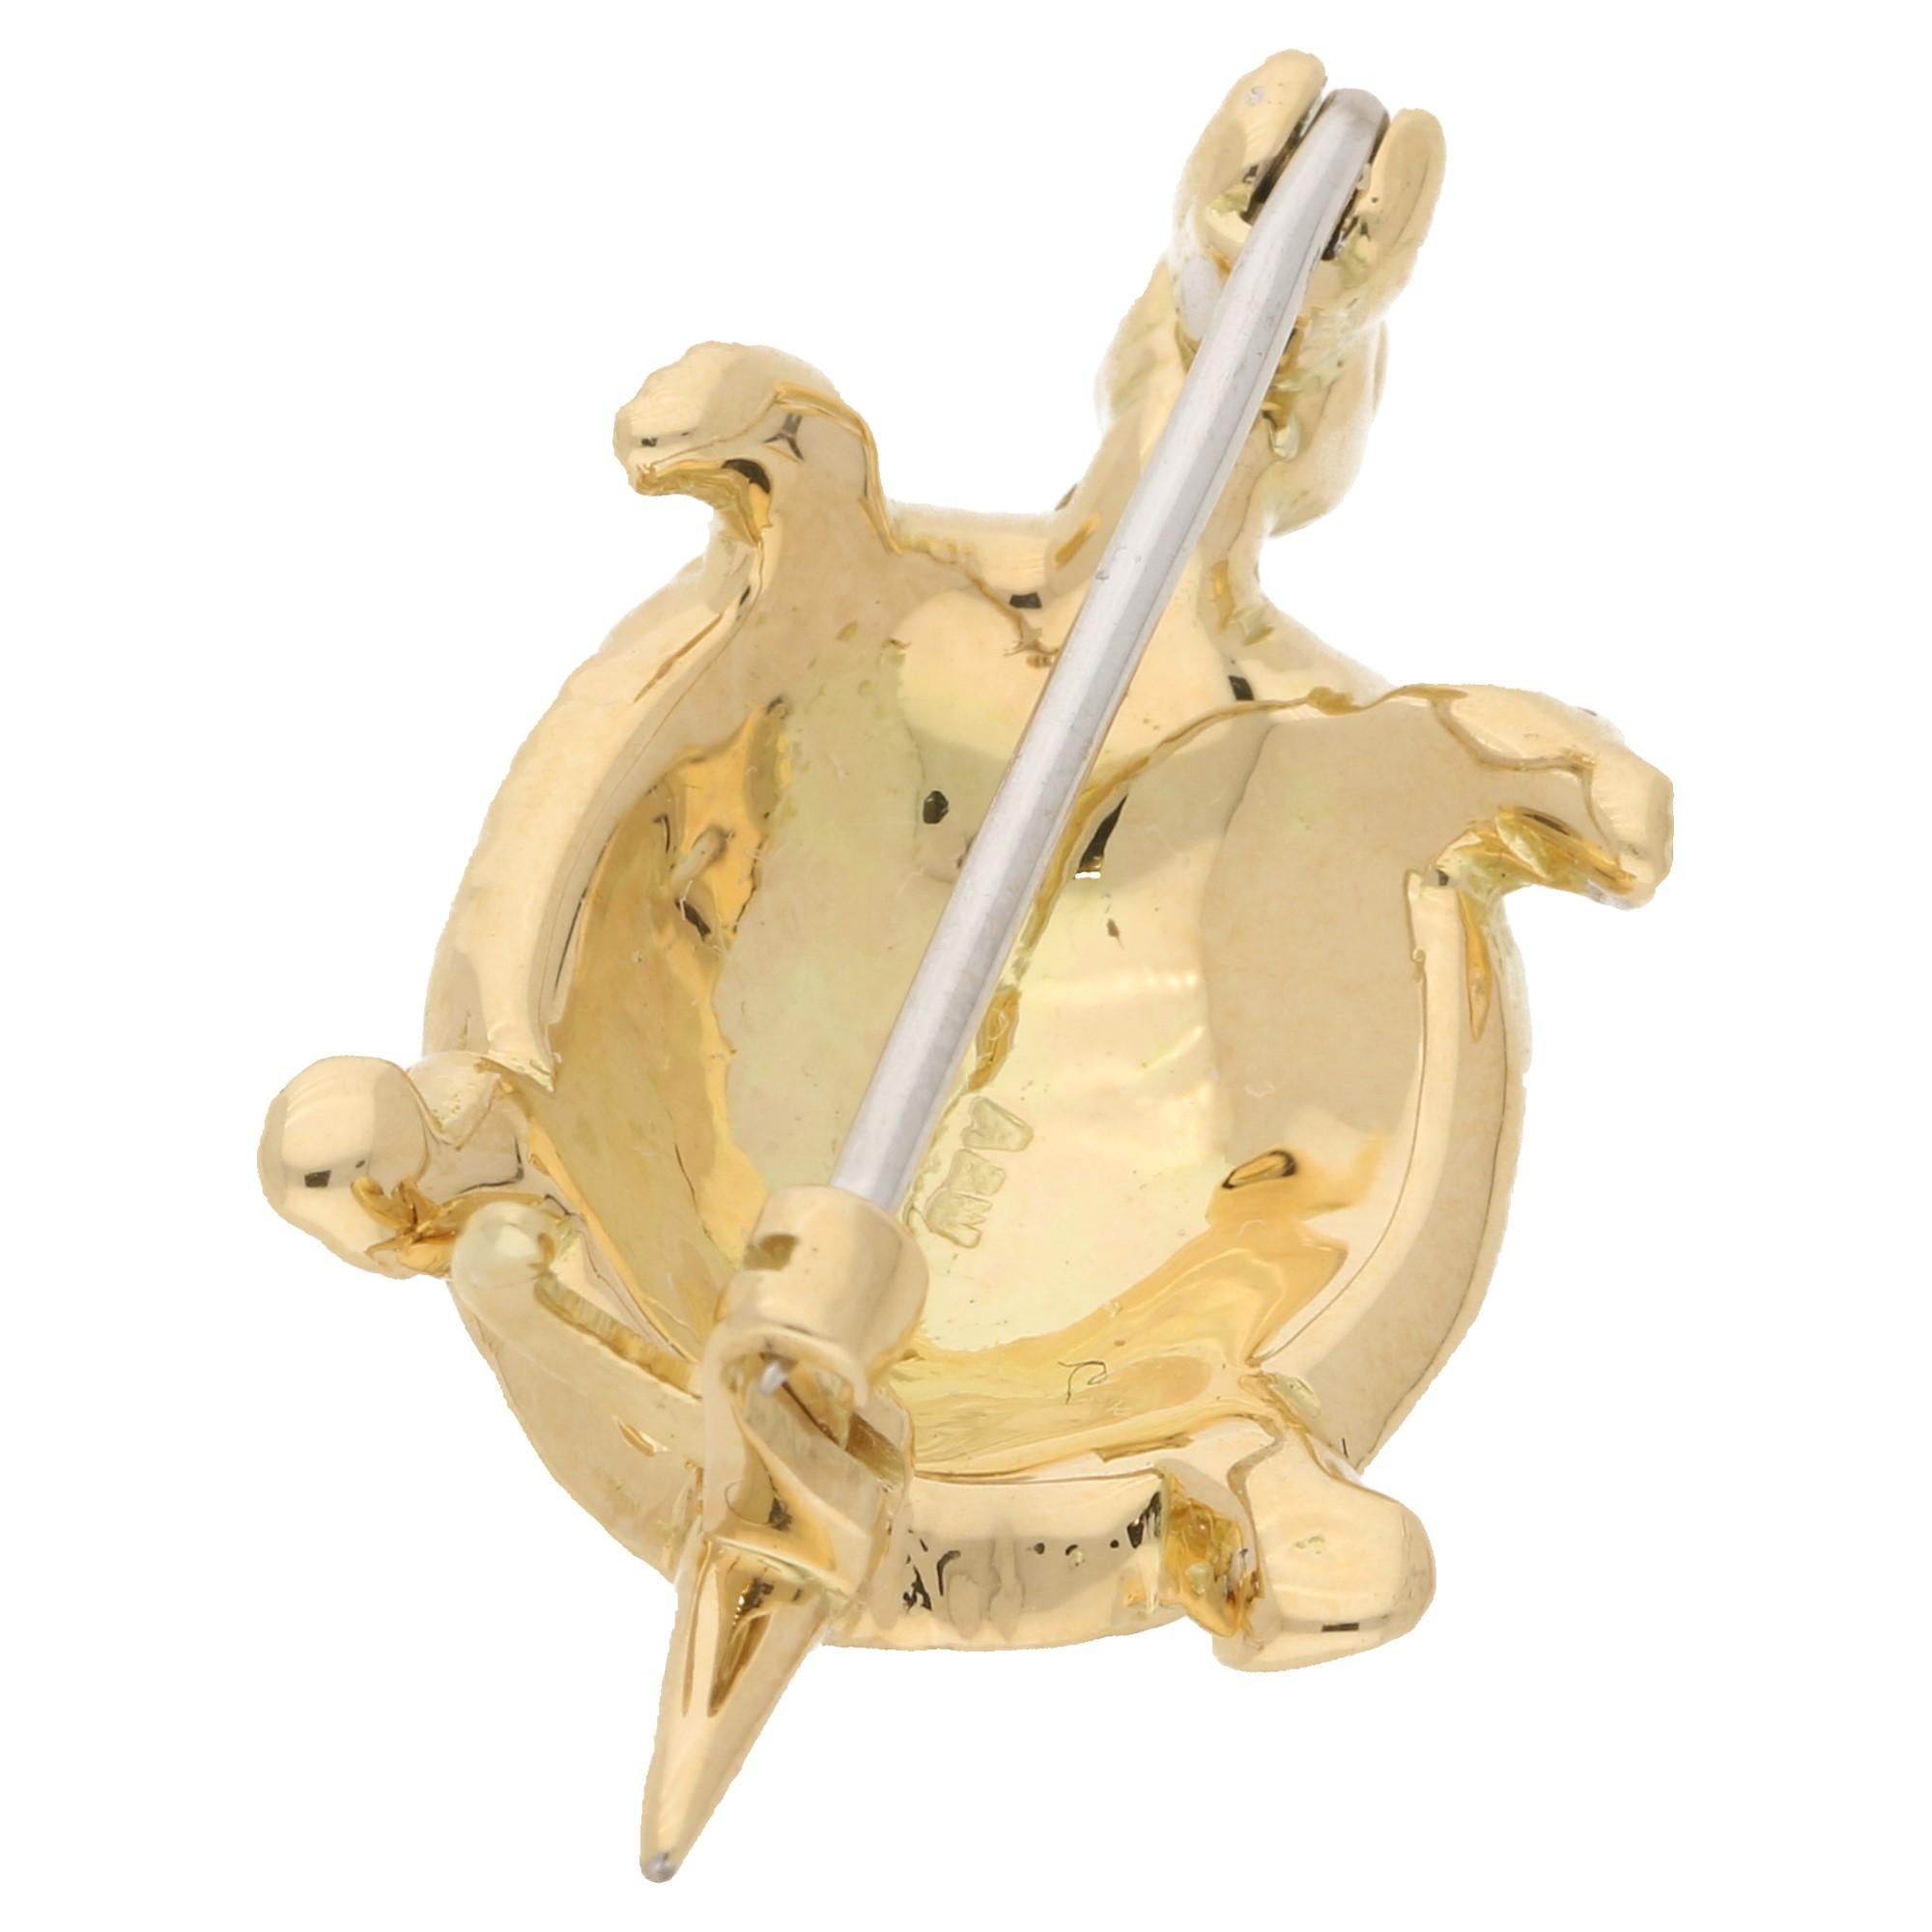 A charming 18ct yellow gold tortoise brooch with six single-cut diamonds emphasizing the head and tail. This brooch has beautiful hand crafted hexagonal detailing to the shell with a secure pin clasp. Stamped 750 for 18ct gold, British maker's marks